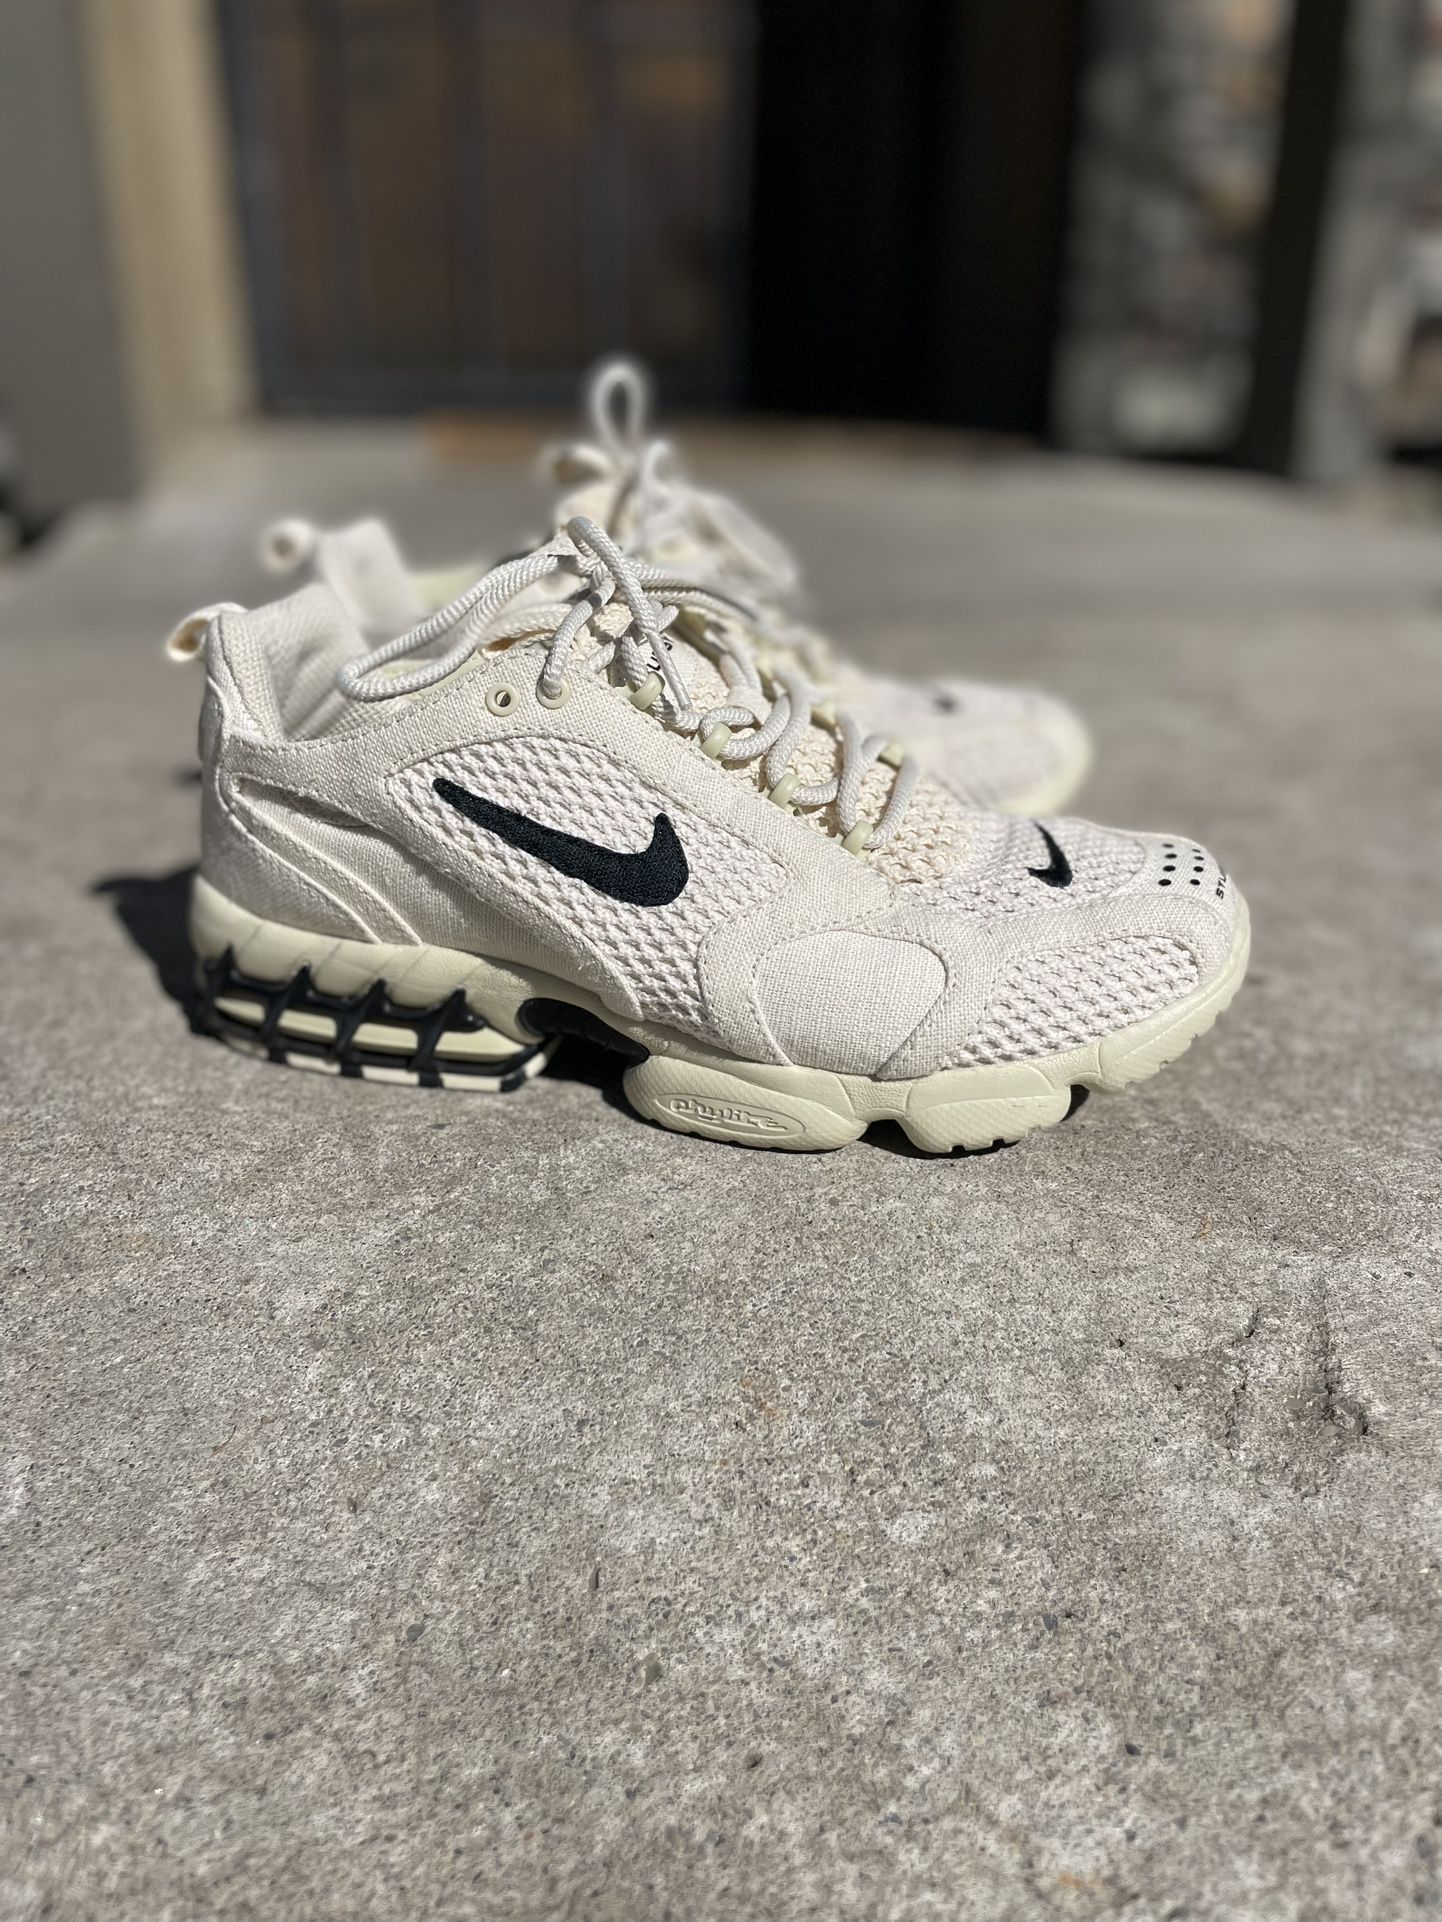 Nike Air Zoom Spiridon Cage x Stussy Fossil Size 9.5 Sale in Modesto, CA - OfferUp